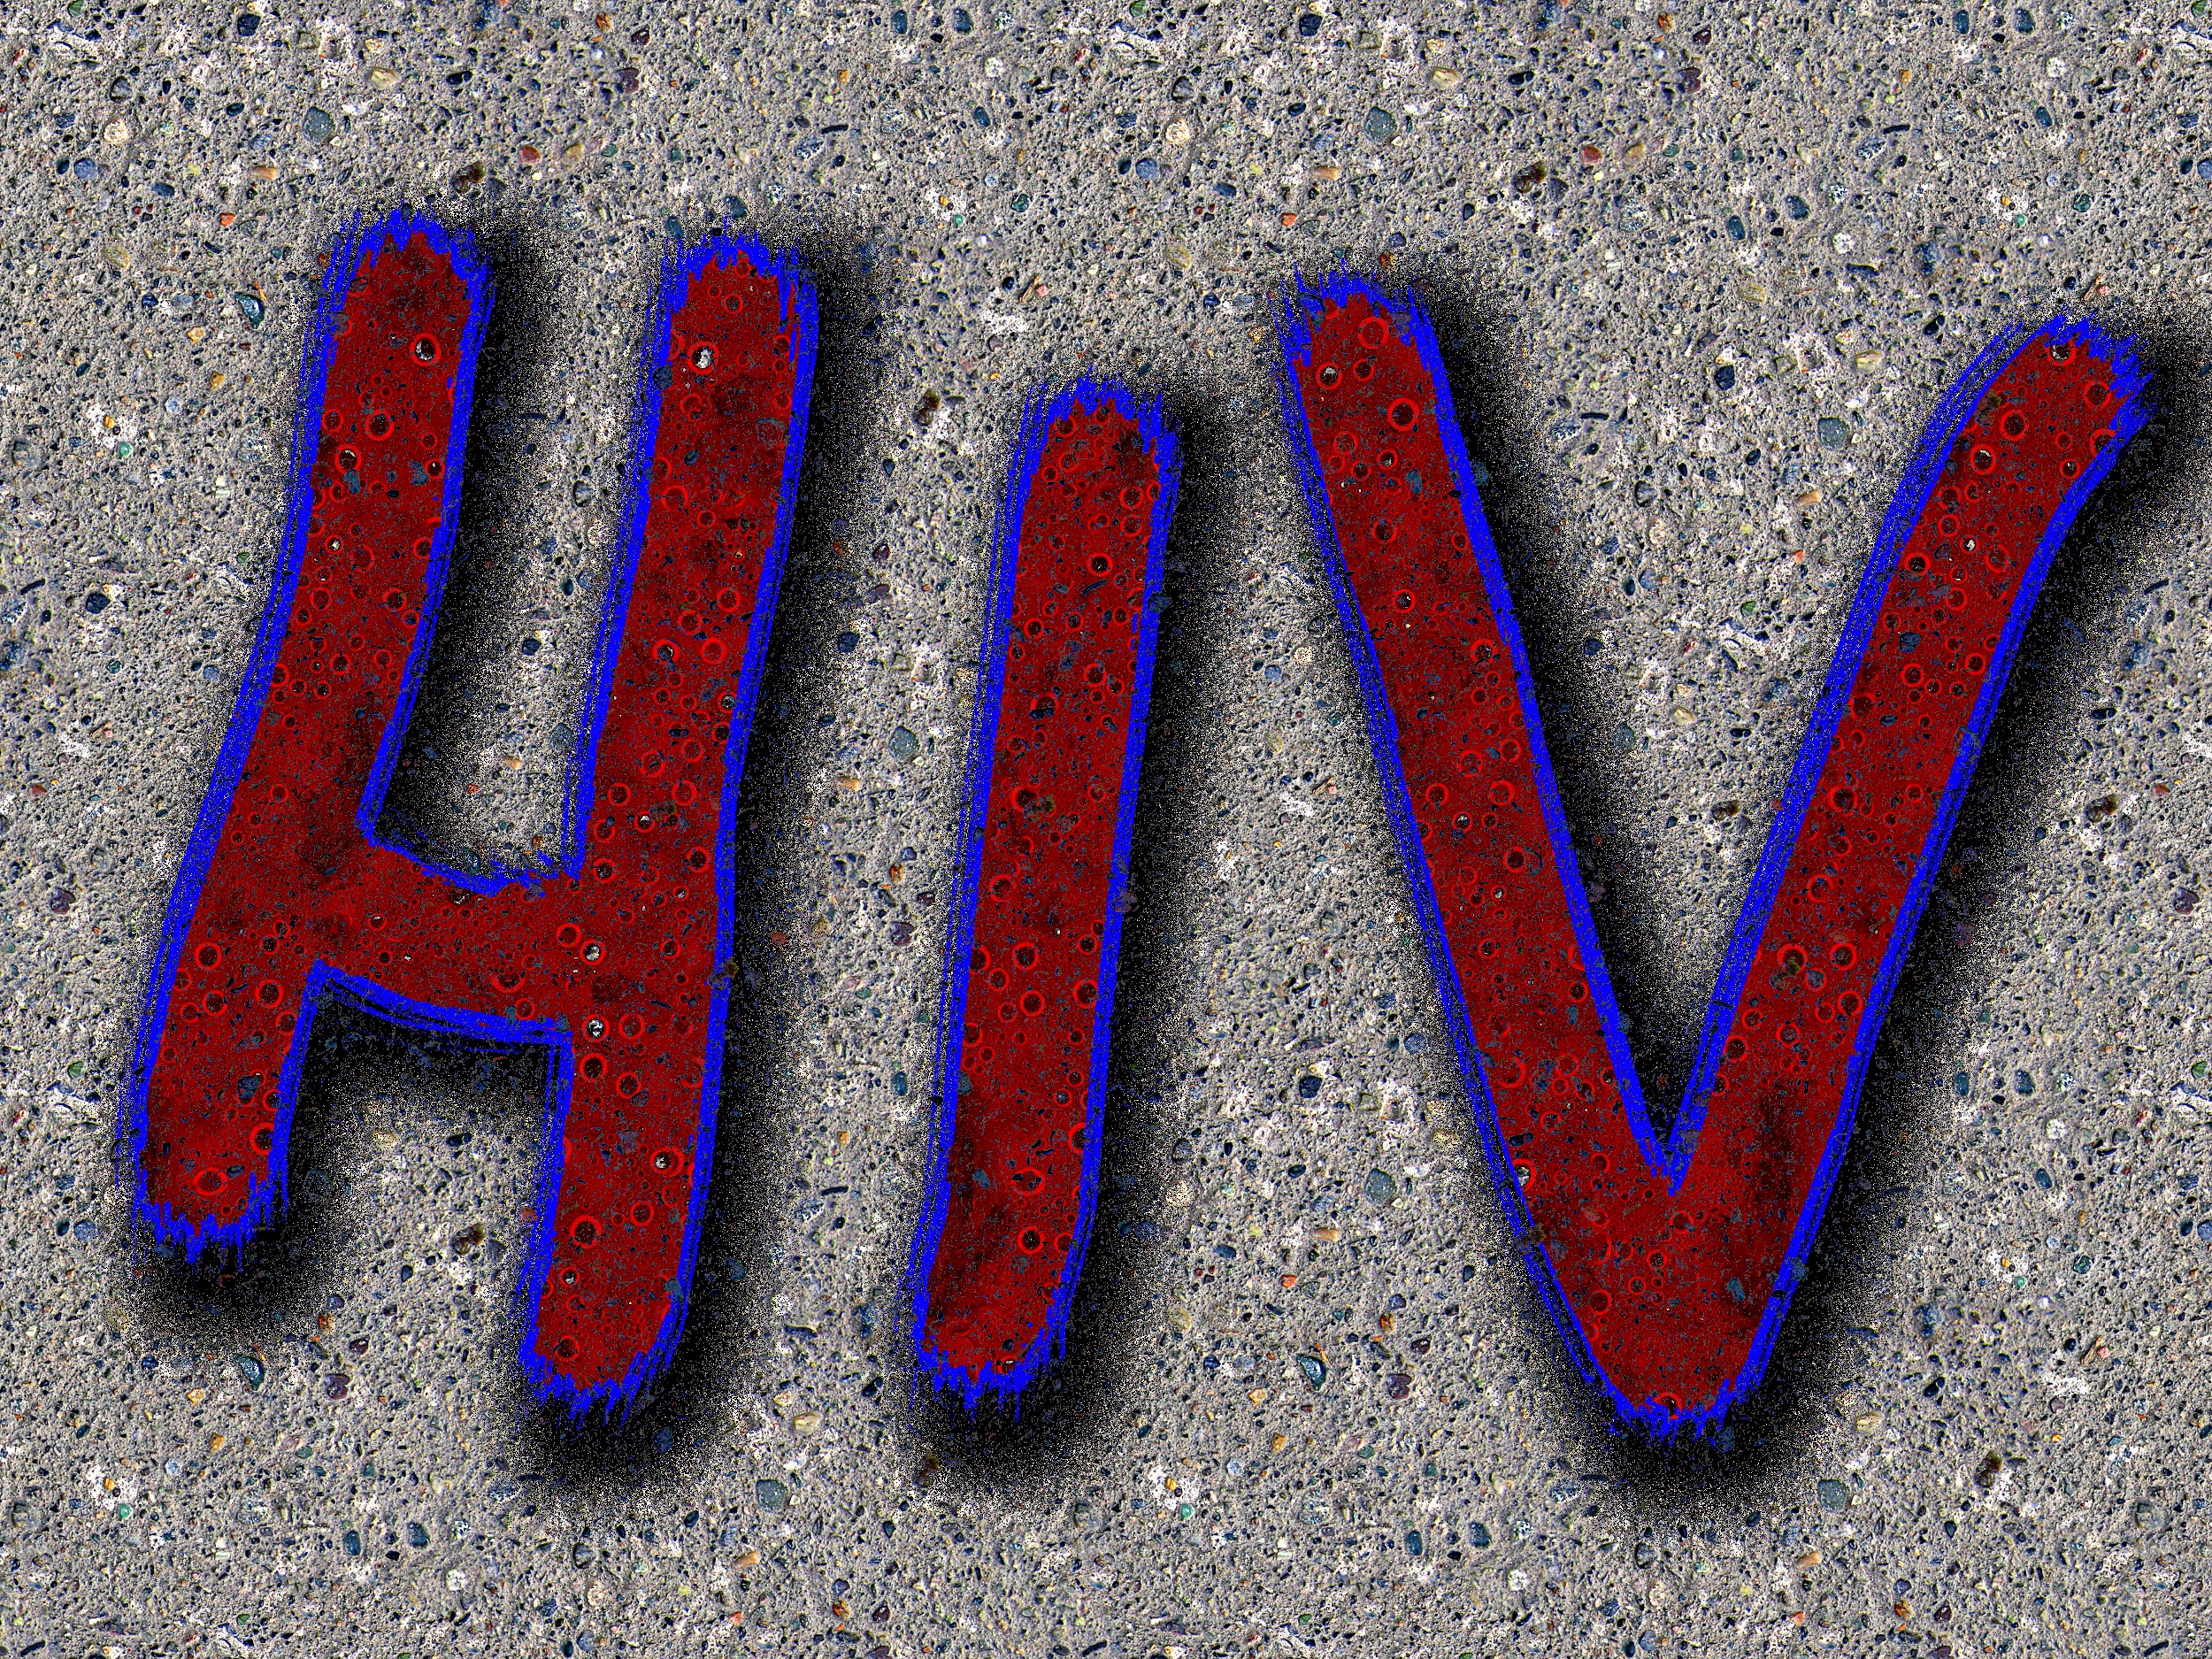 Lockdown an “opportunity to end new HIV infections altogether”